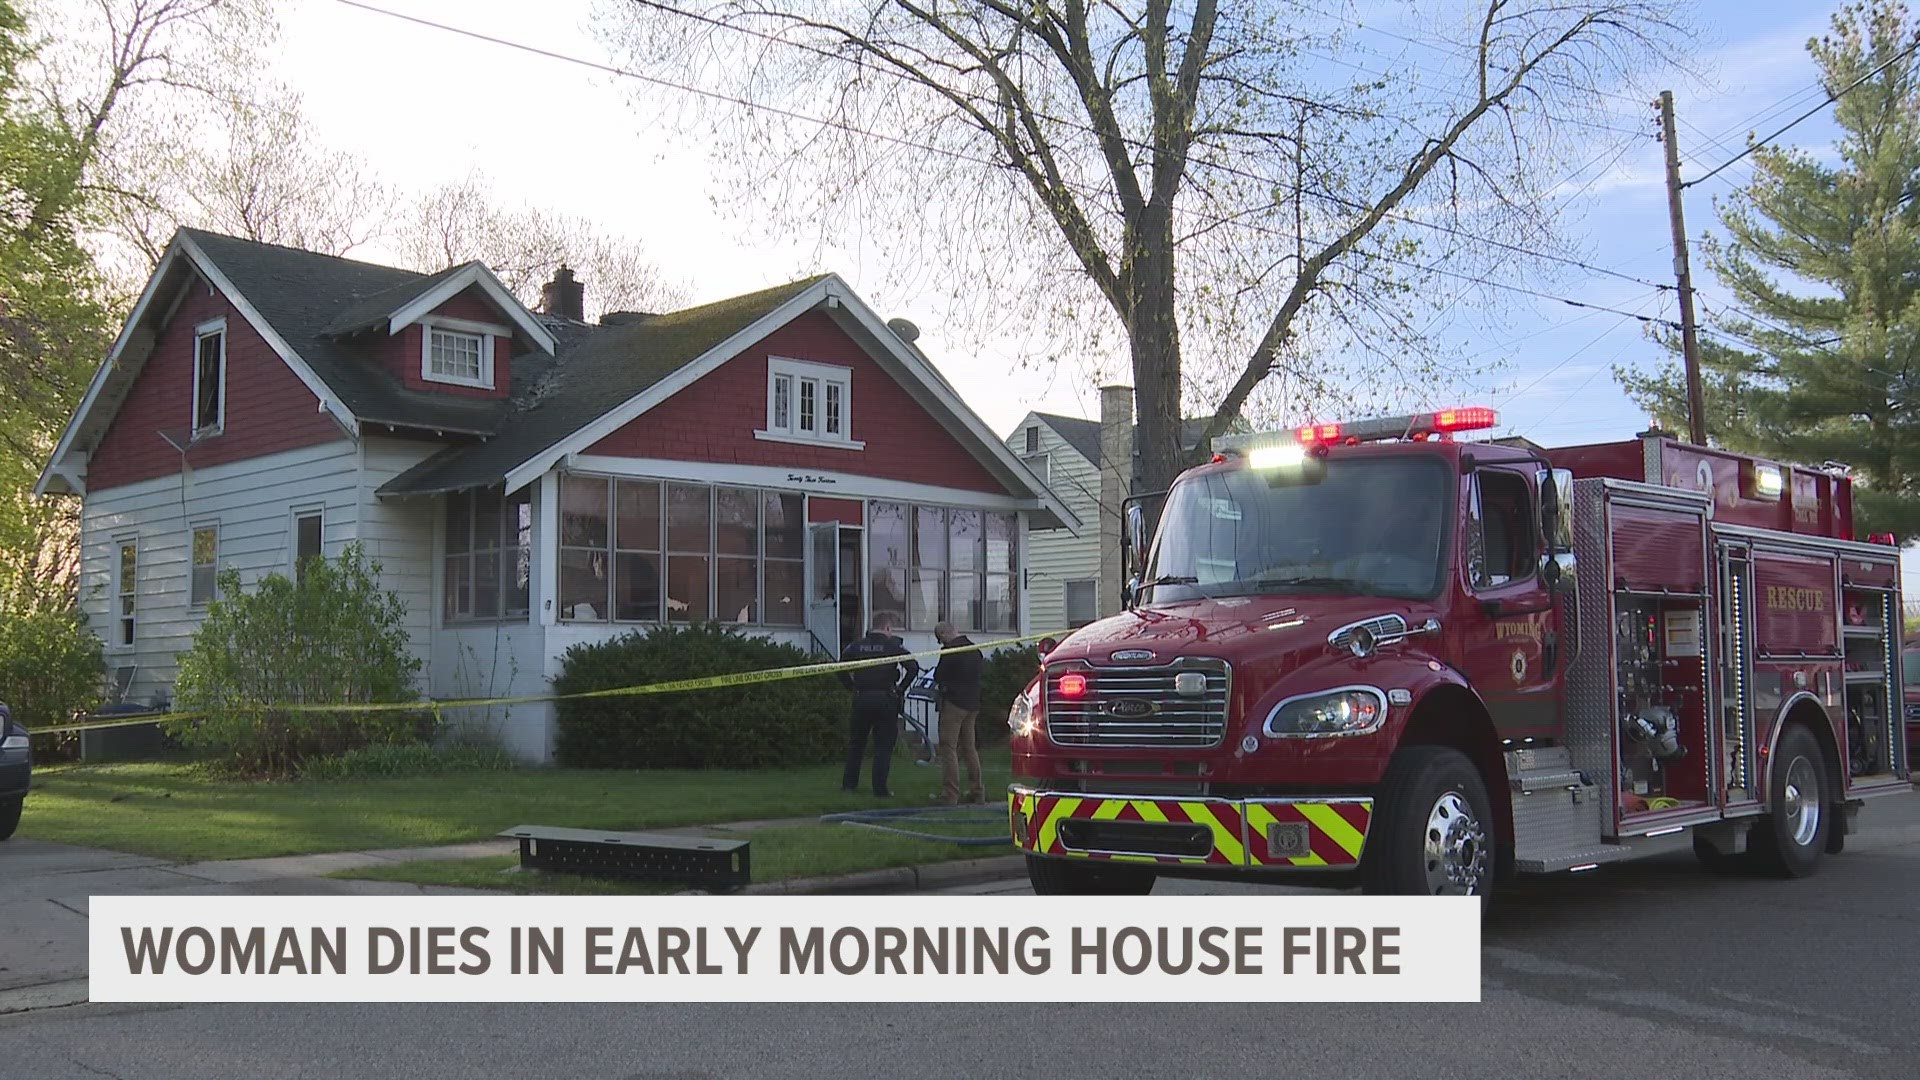 Fire investigators said a 42-year-old woman was the only one inside.